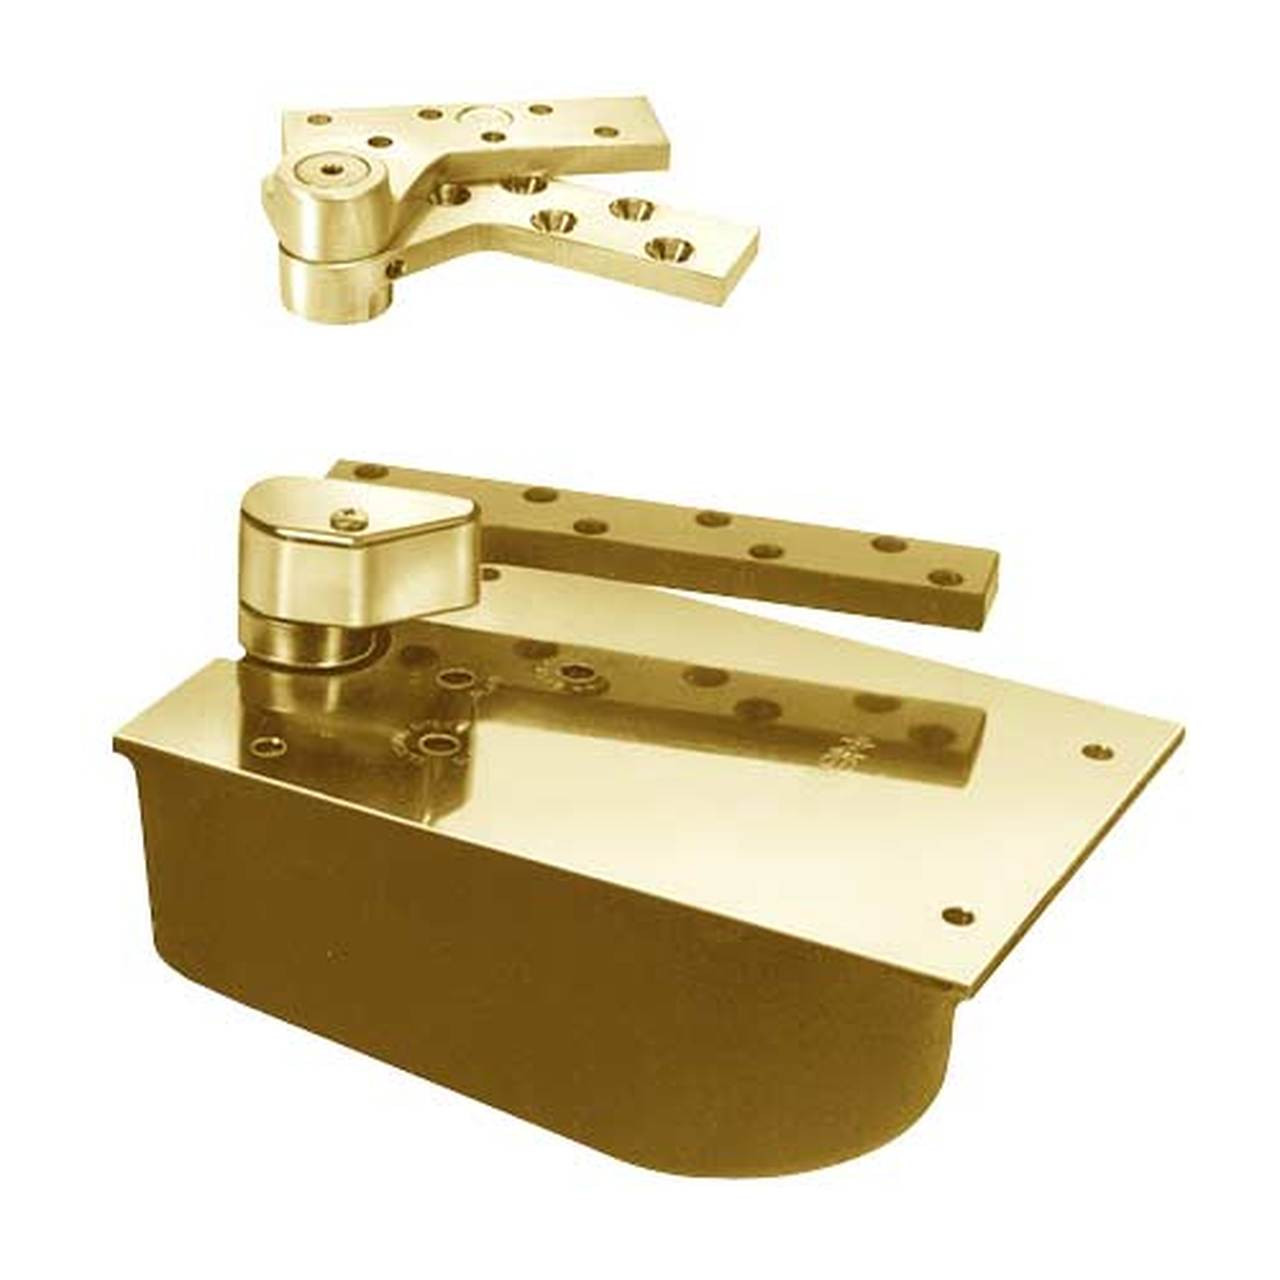 L27-105N-LCC-RH-2-1/2-605 Rixson 27 Series Extra Heavy Duty Lead Lined Offset Floor Closer in Bright Brass Finish